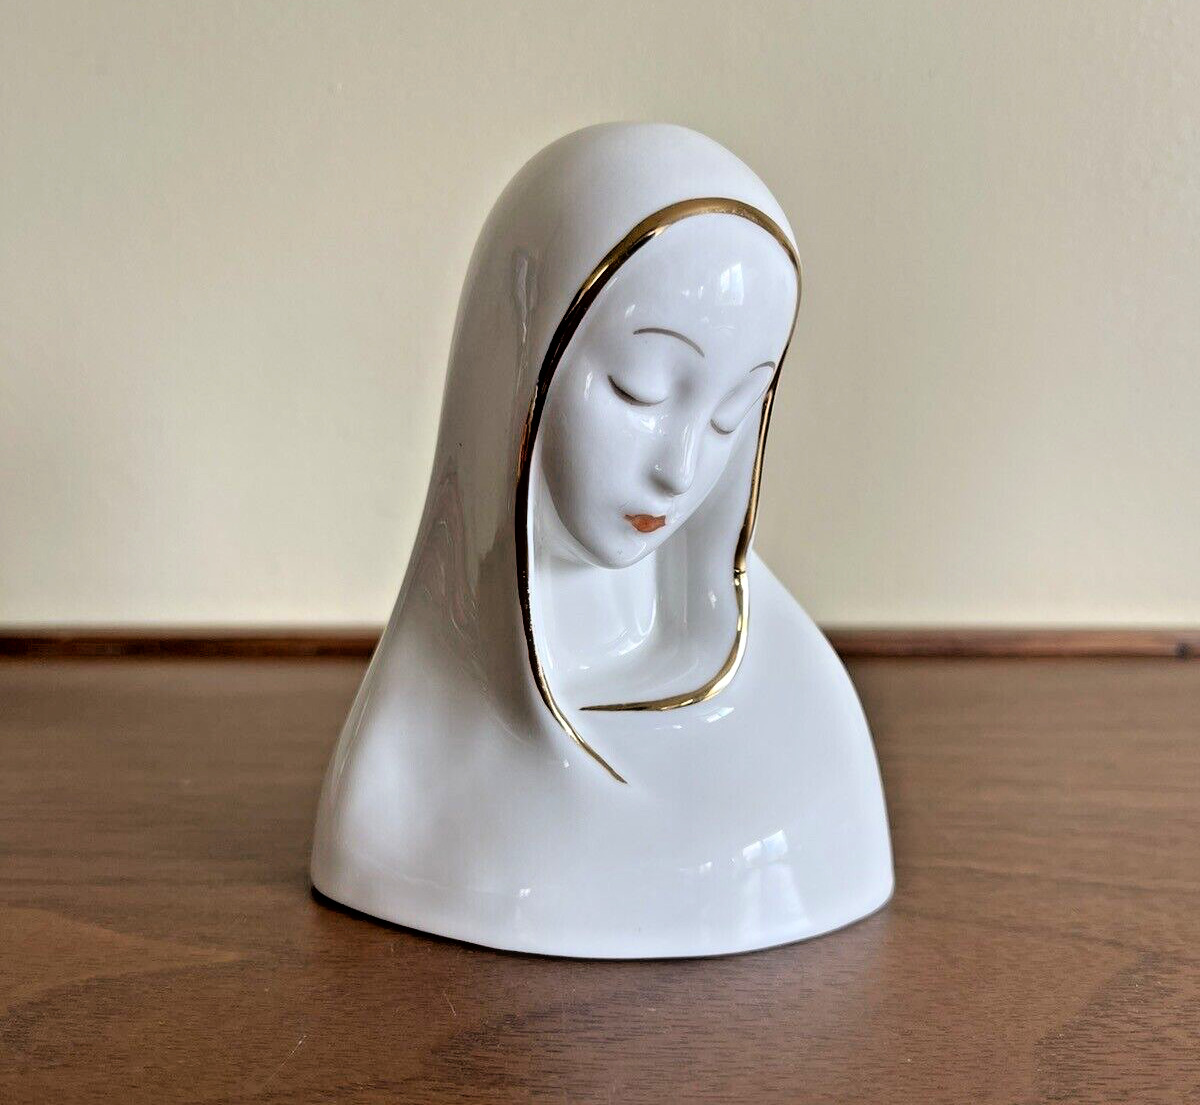 Vintage Boehm Madonna Virgin Mary Small Bust Figure Glossy White Porcelain Gold